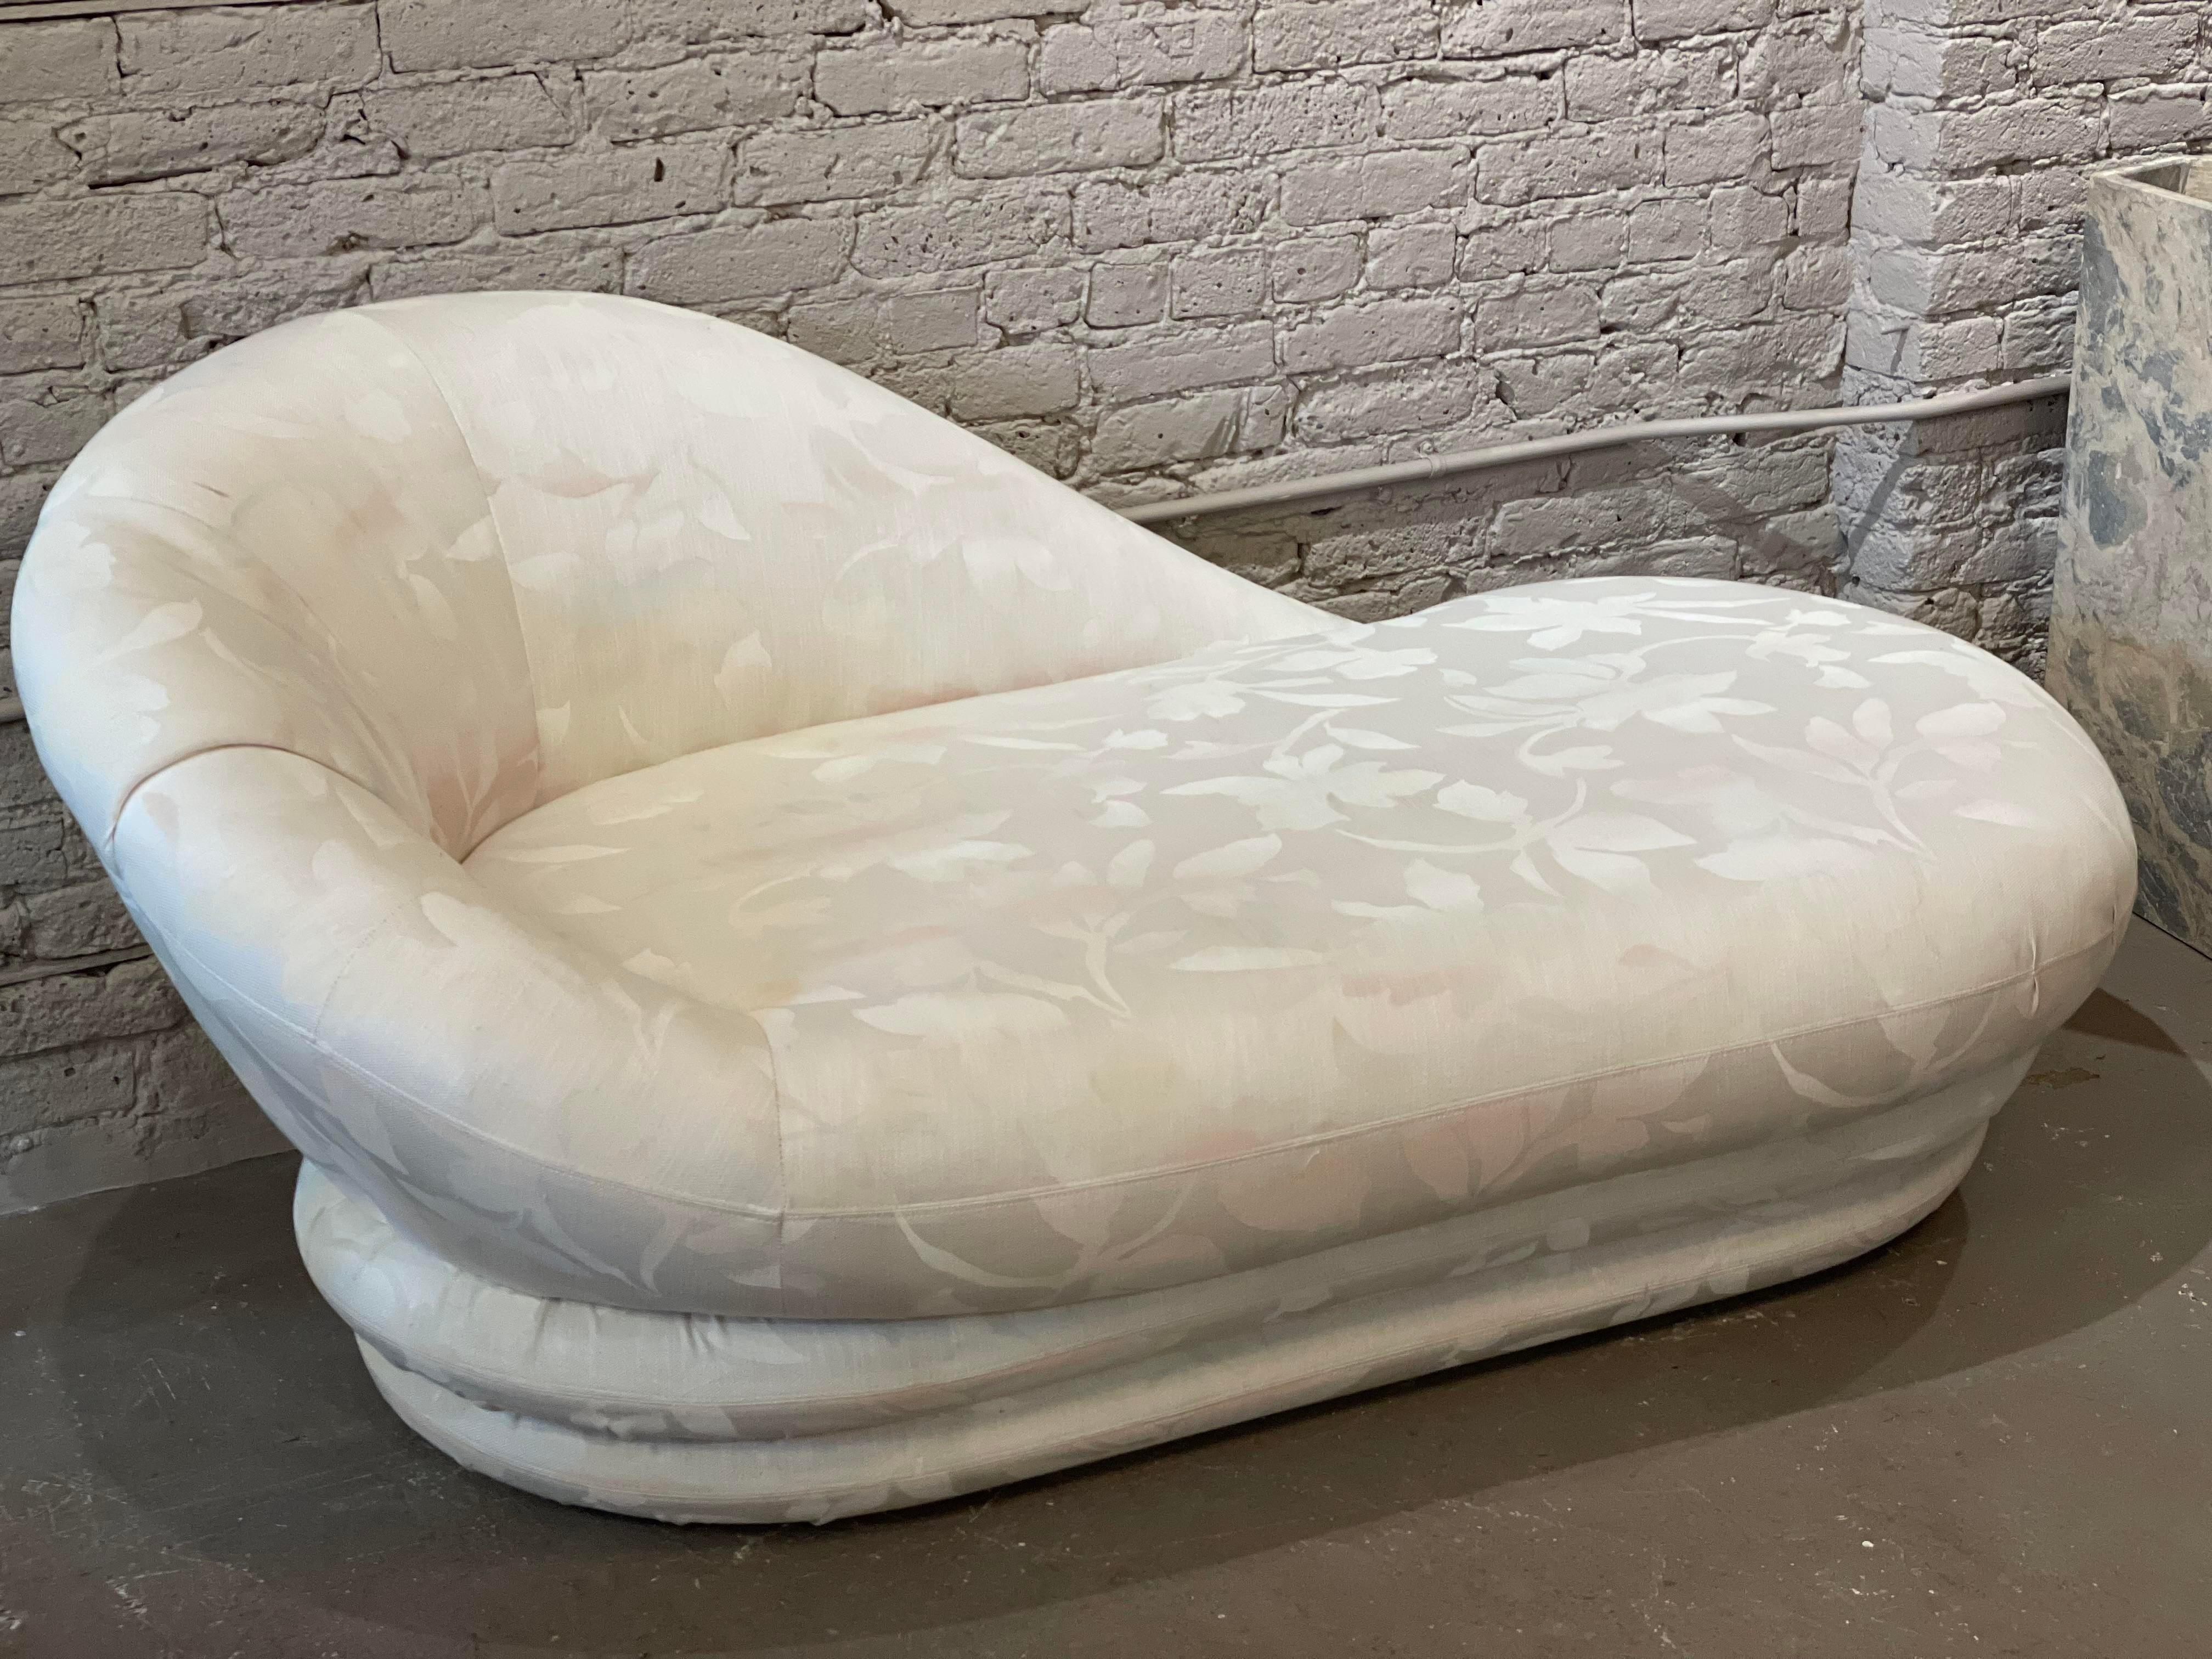 Absolutely adorable and comfortable. The perfect size for a living room or bedroom - the dramatic asymmetrical curved back adds great back support and desired comfort. Use as is or reupholster.